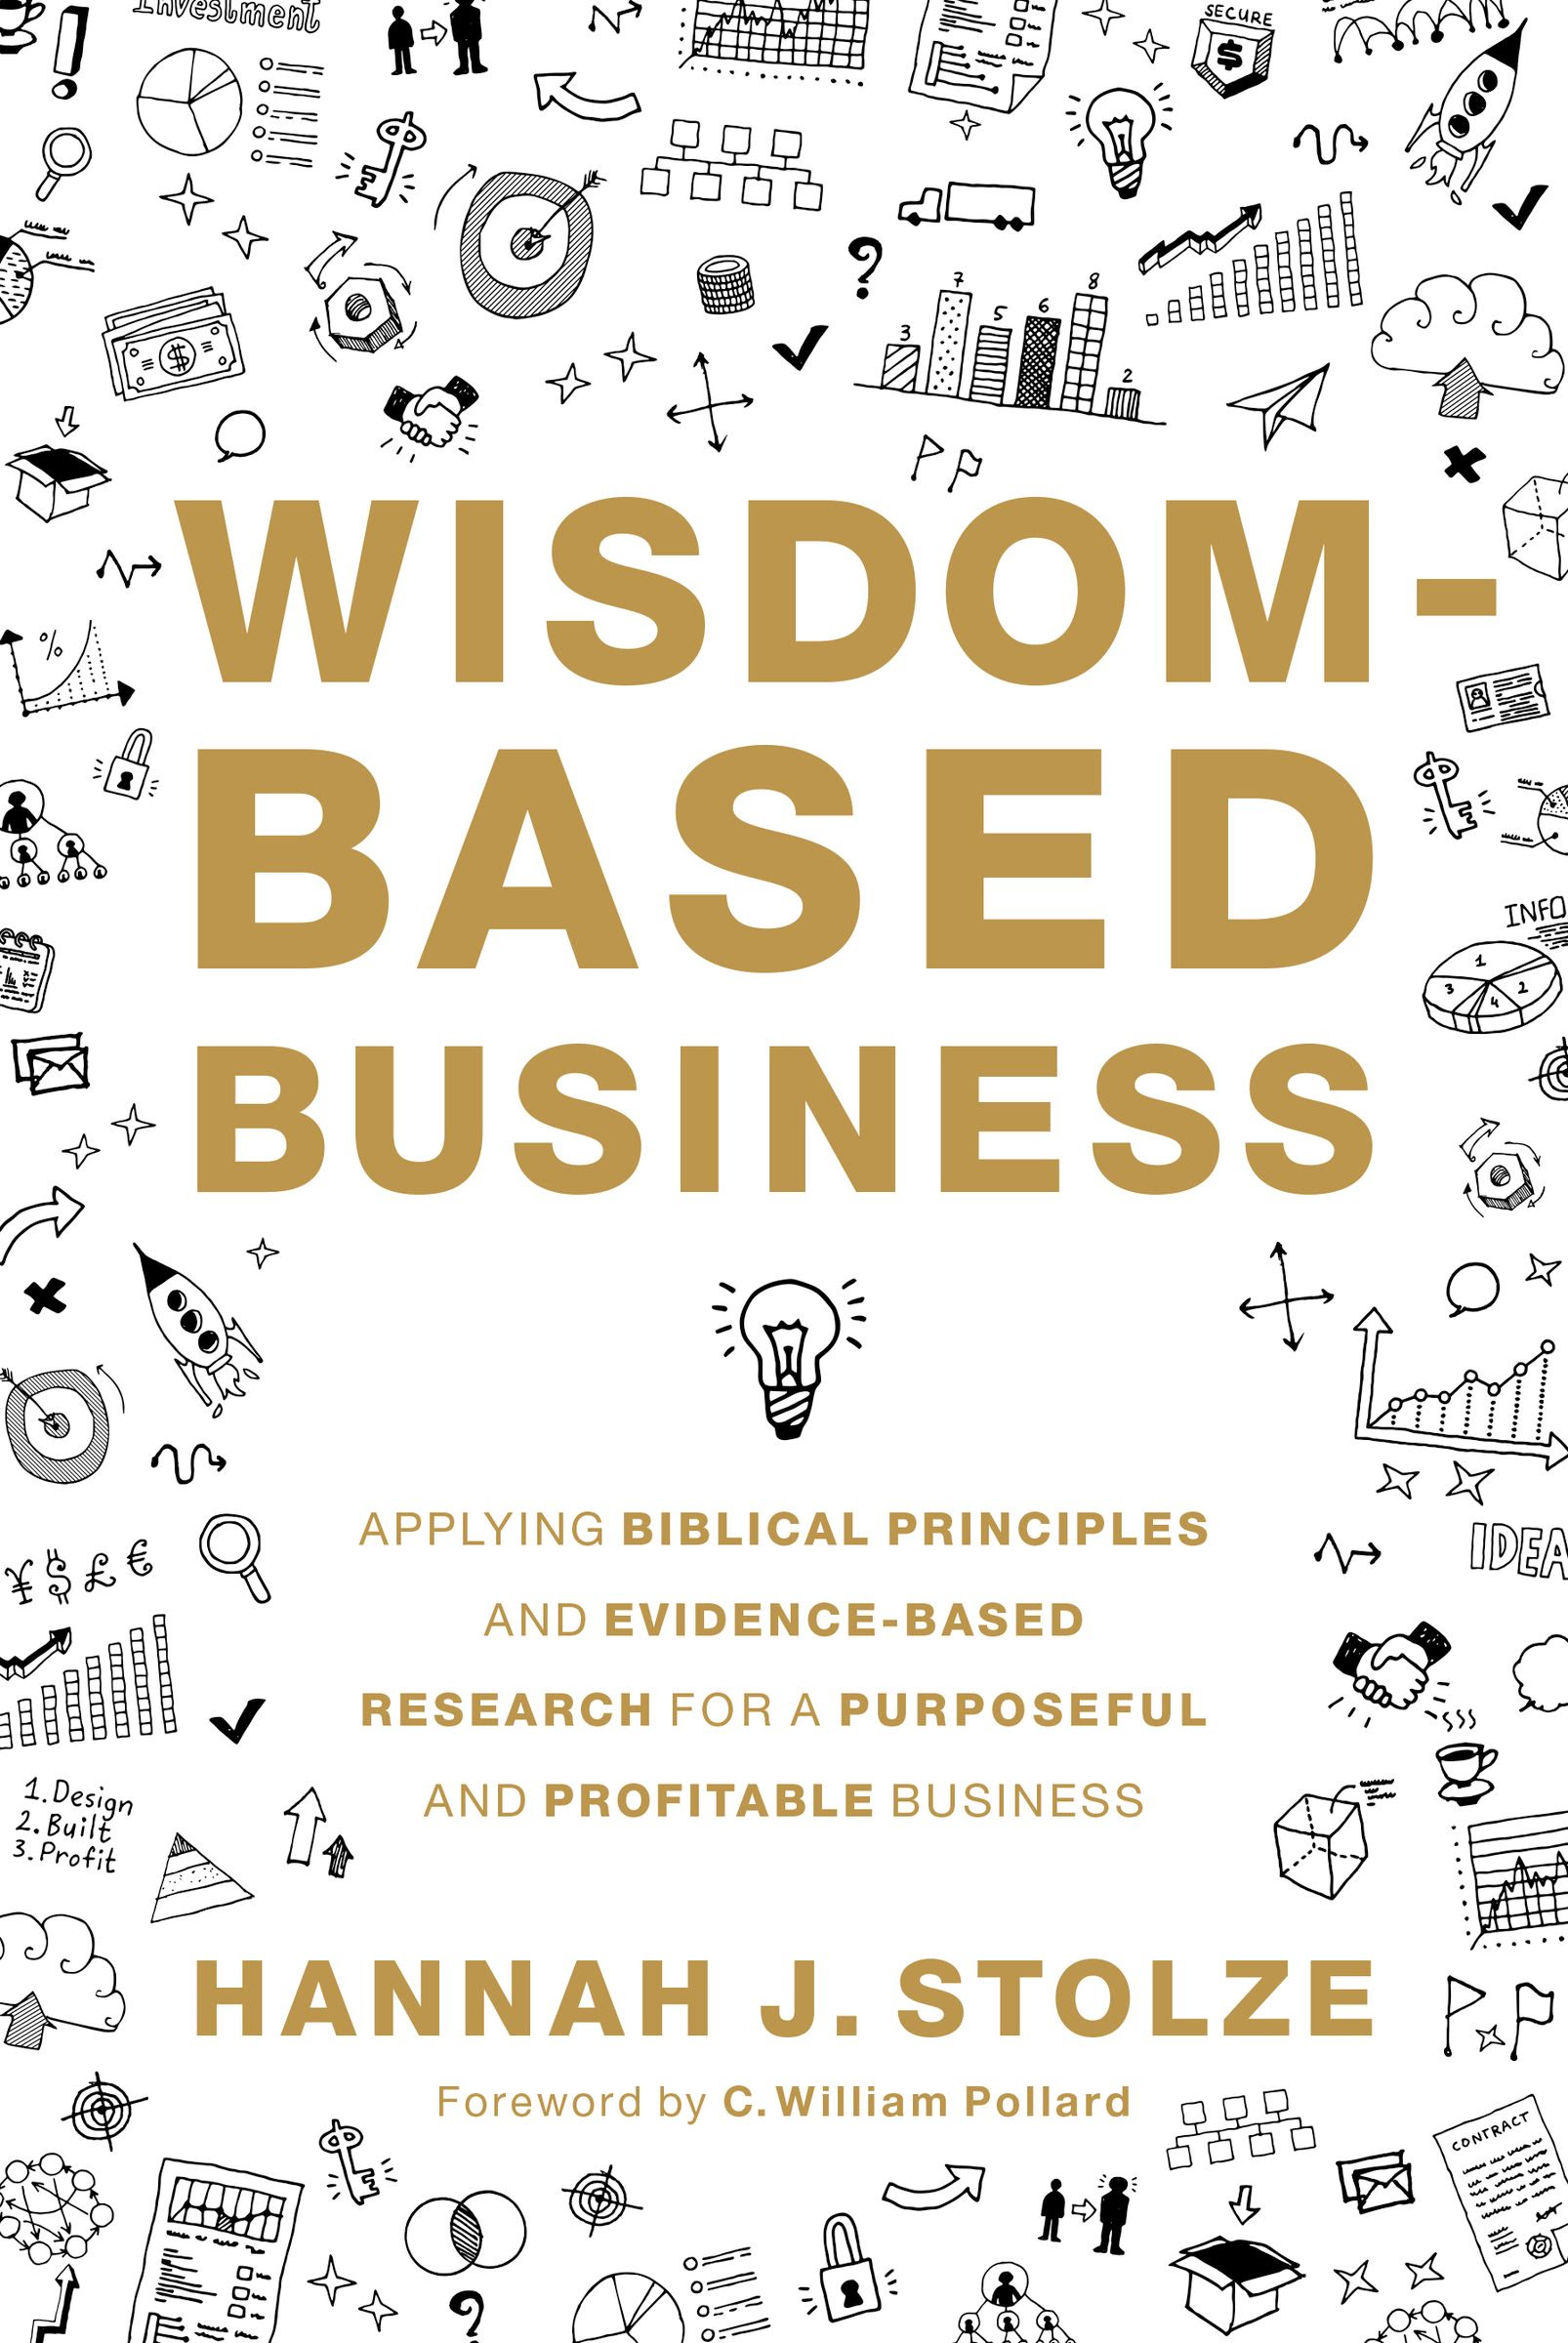 Wisdom-Based Business: Applying Biblical Principles and Evidence-Based Research for a Purposeful and Profitable Business PDF